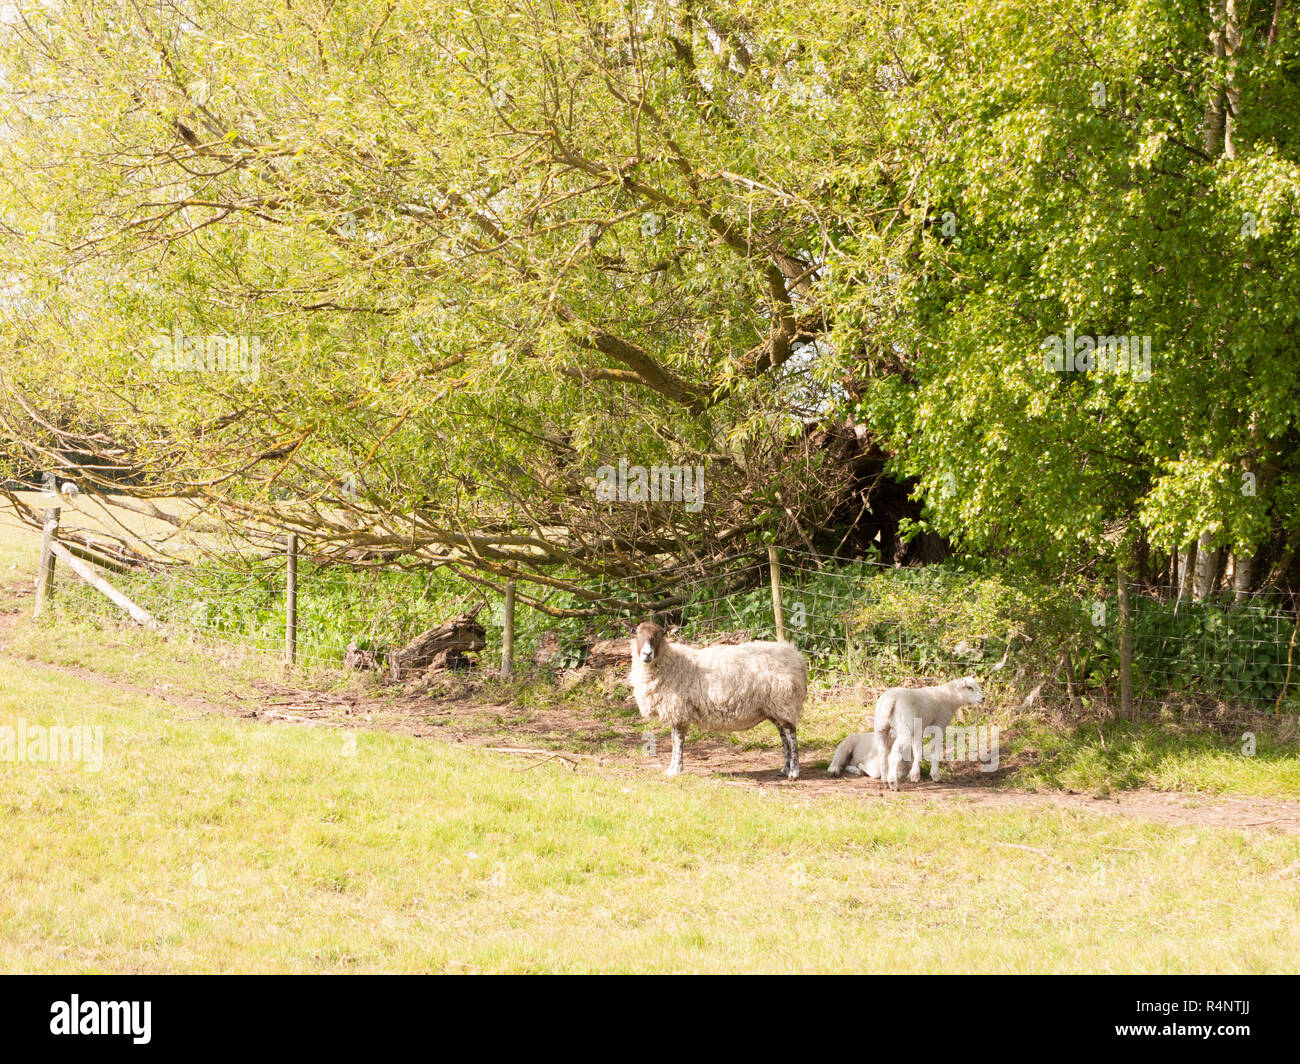 cute sheep resting and grazing in the forest part of a field Stock Photo